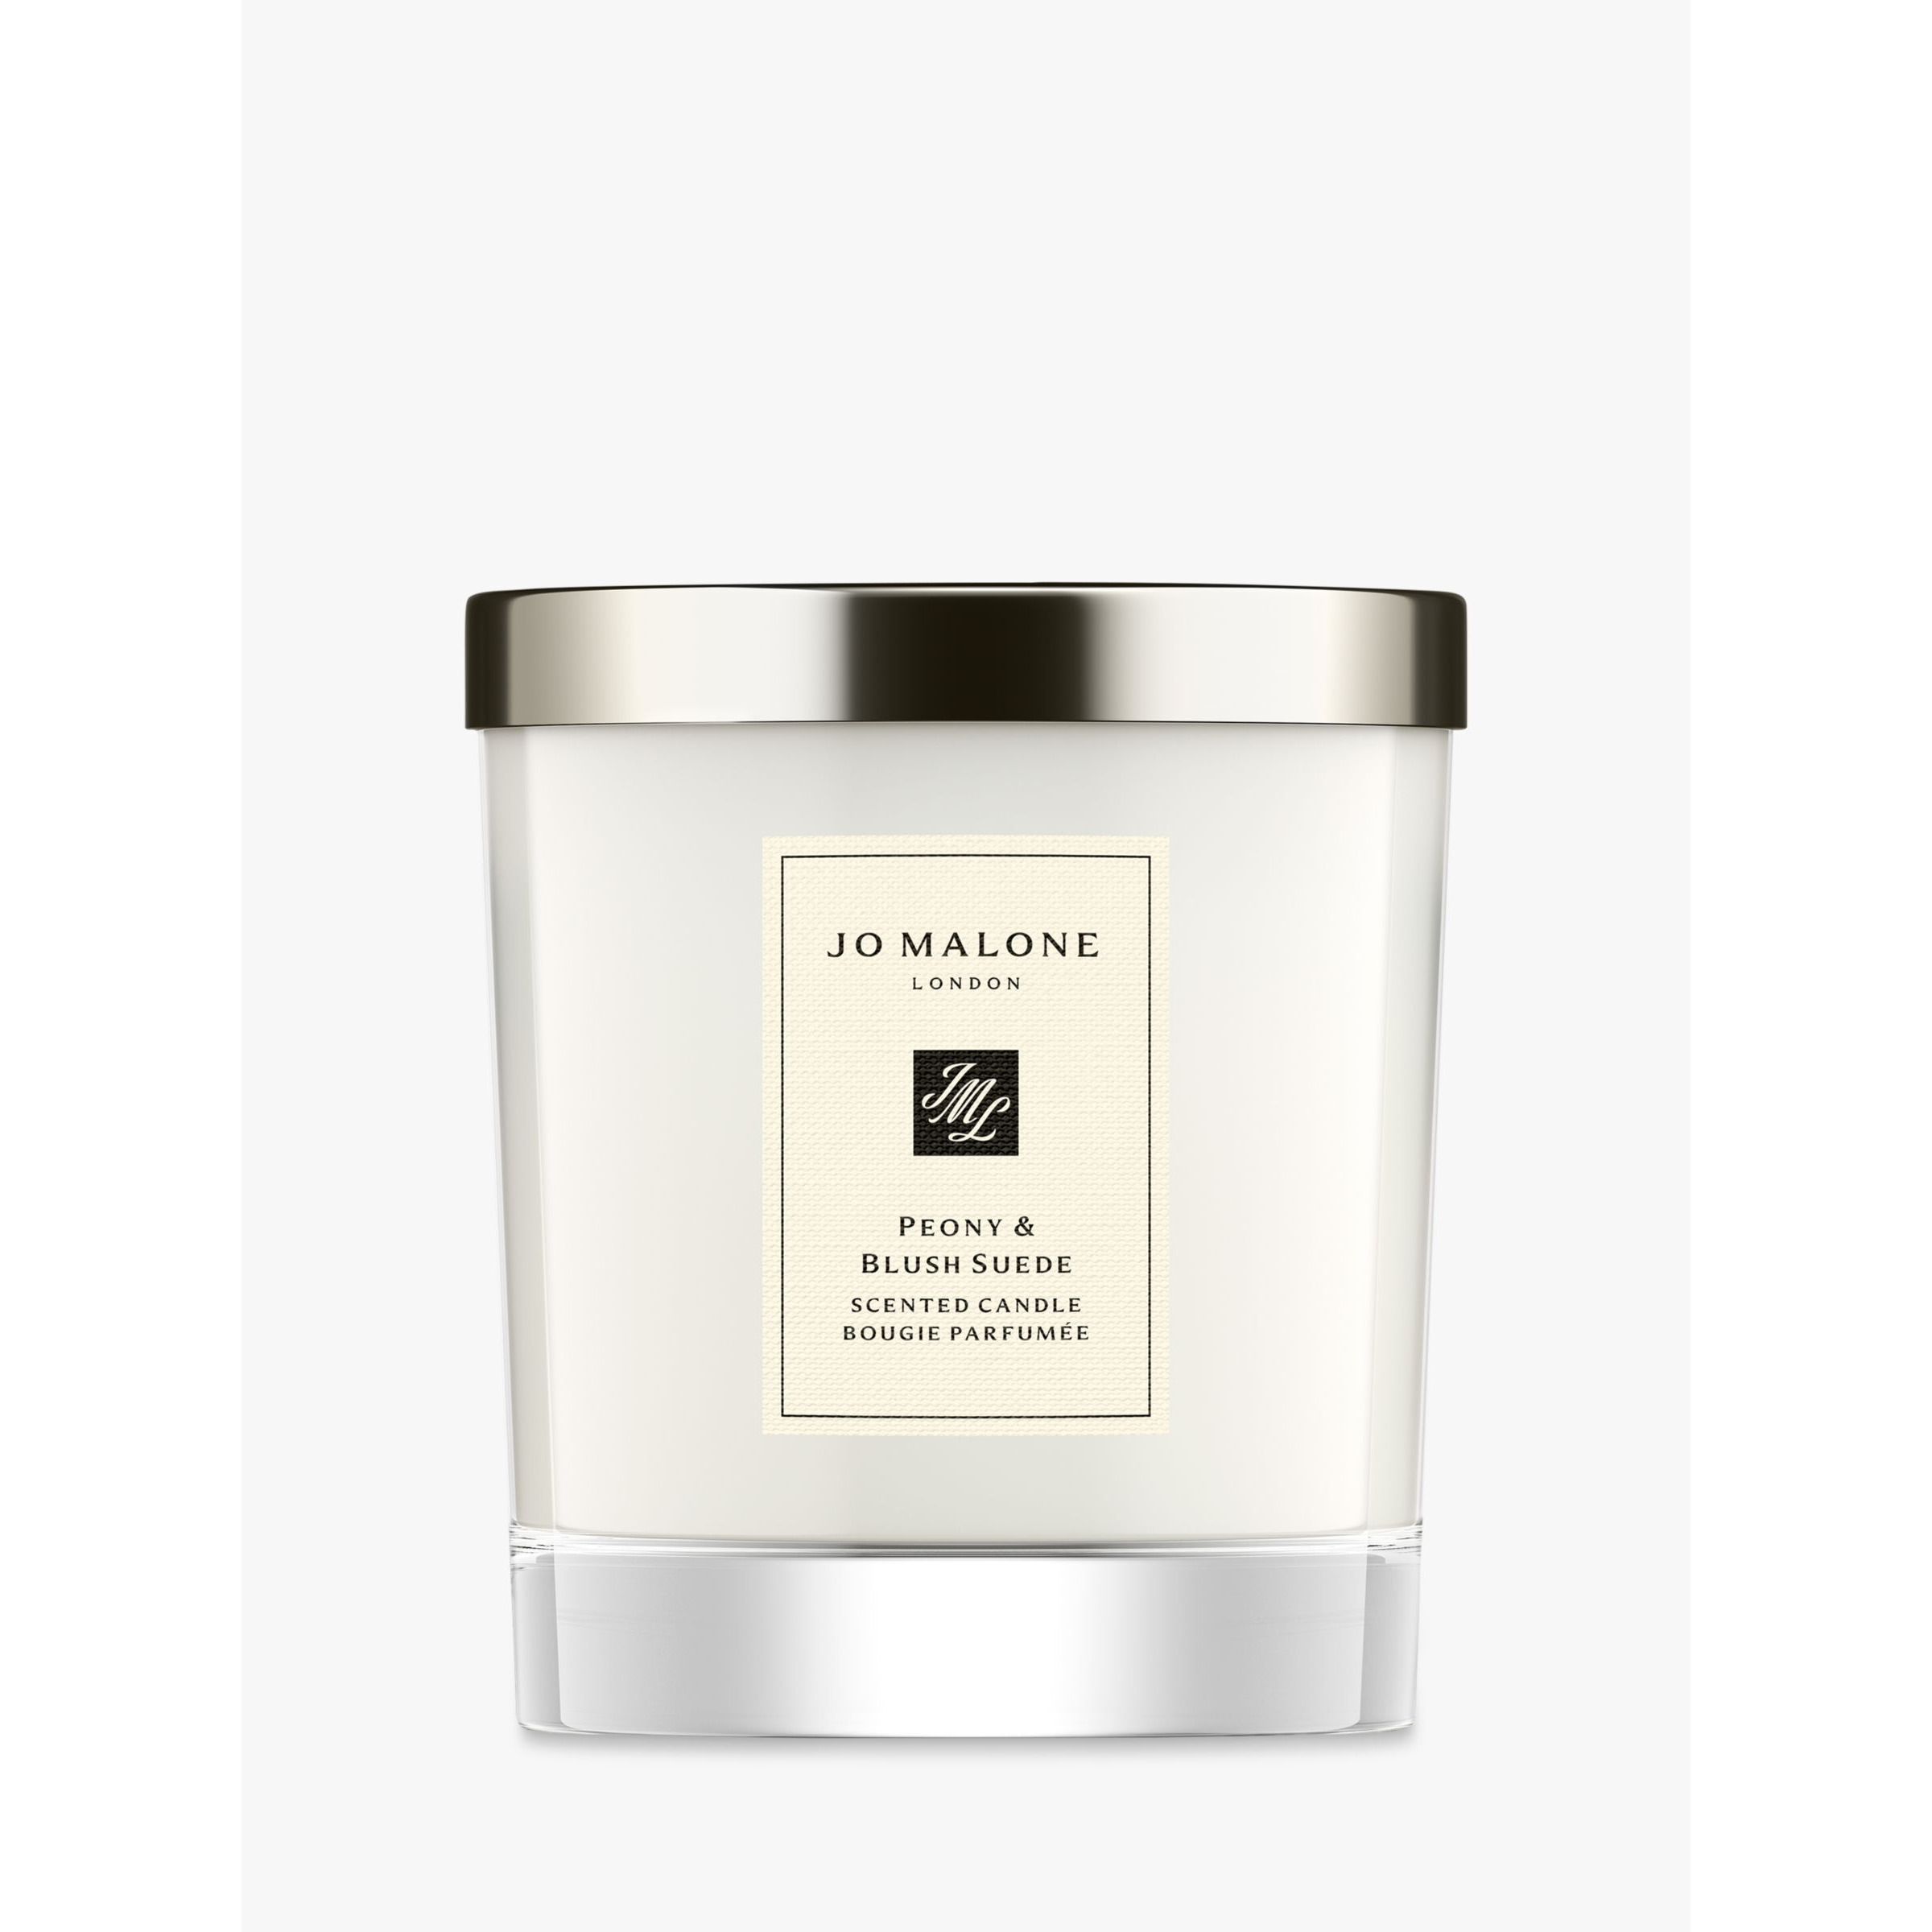 Jo Malone London Peony & Blush Suede Scented Candle - image 1